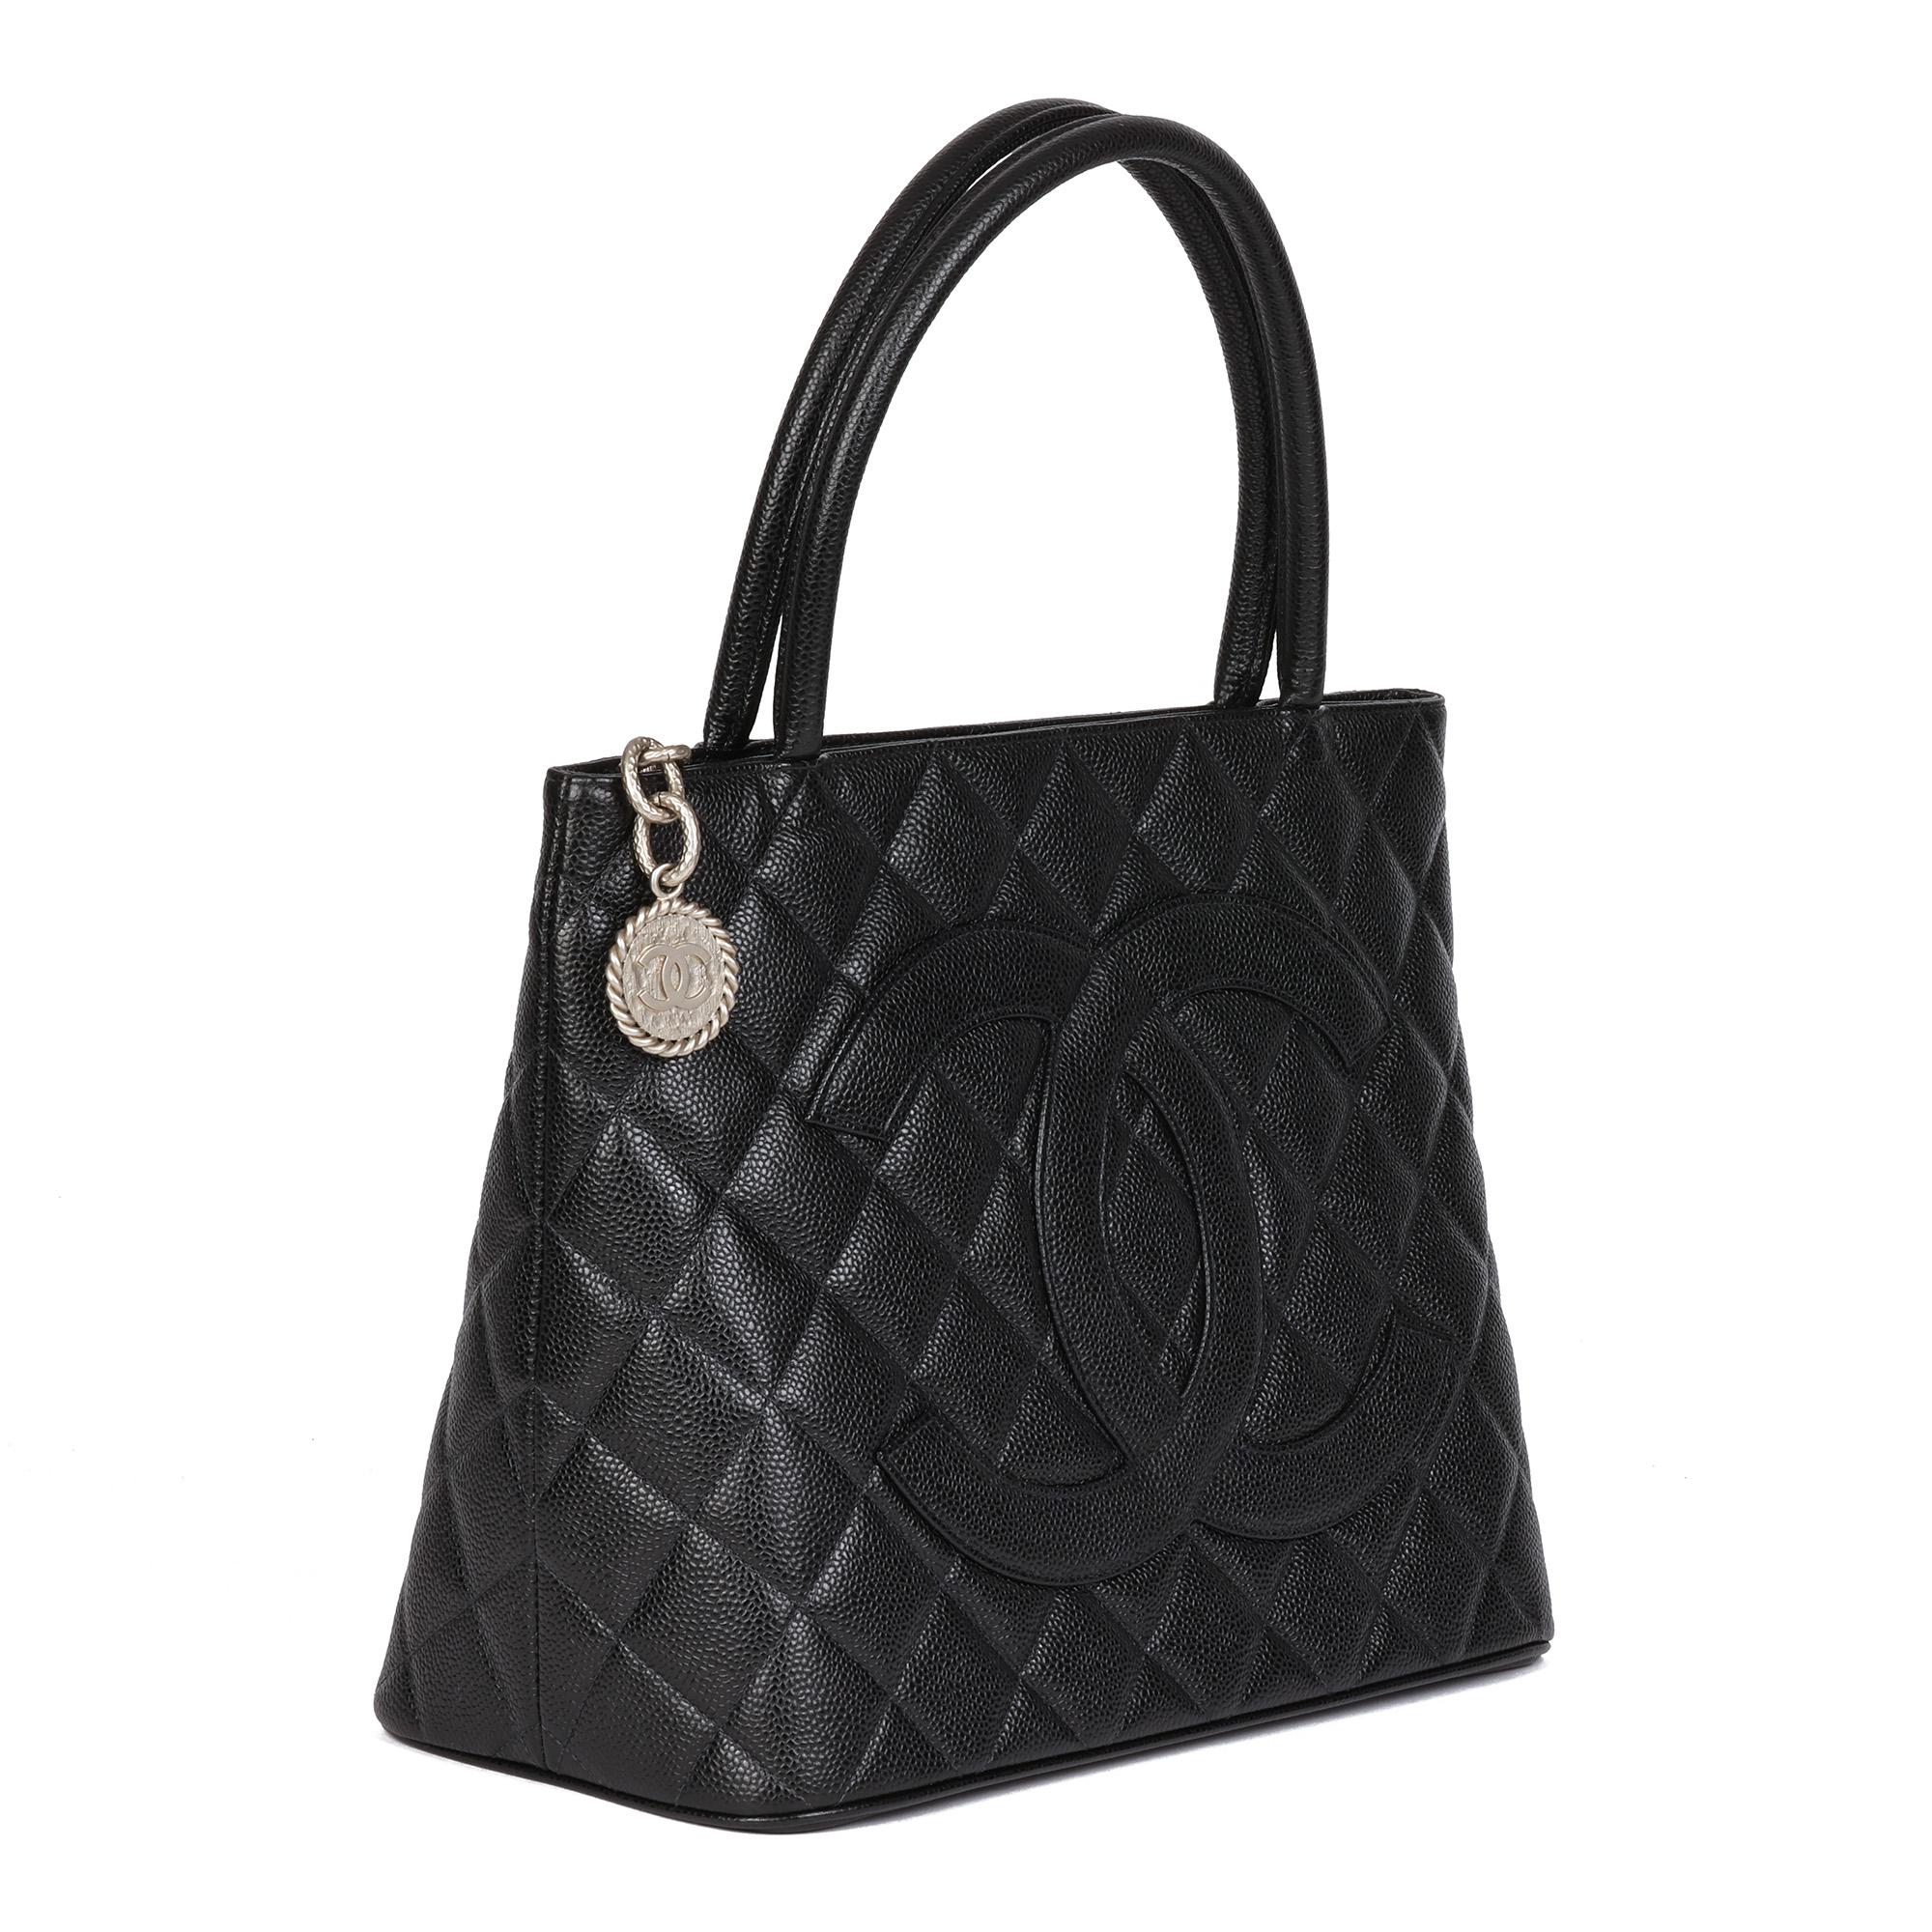 CHANEL
Black Quilted Caviar Leather Vintage Medallion Tote

Xupes Reference: HB4549
Serial Number: 7925508
Age (Circa): 2002
Accompanied By: Chanel Dust Bag, Authenticity Card, Care Booklet
Authenticity Details: Authenticity Card, Serial Sticker